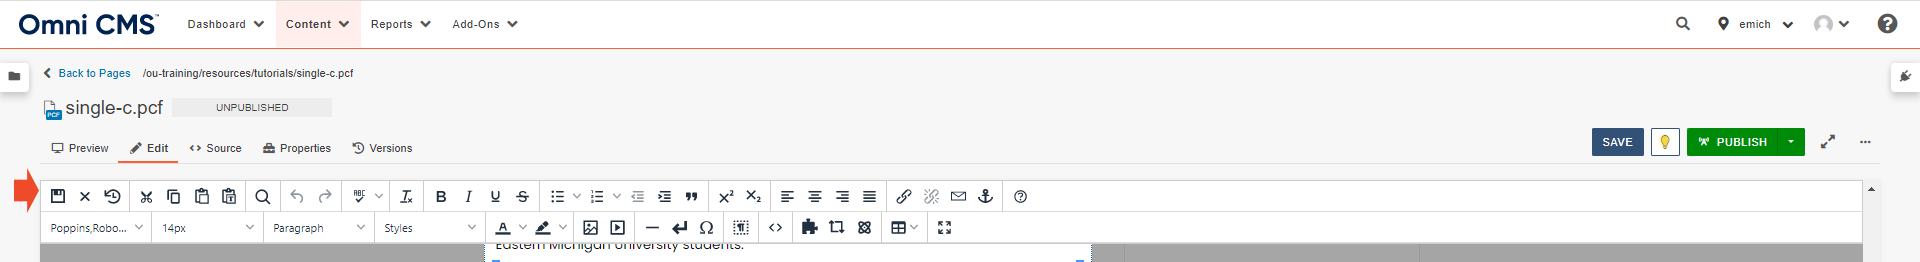 A screenshot of the Save And Exit icon in the Omni CMS edit toolbar.